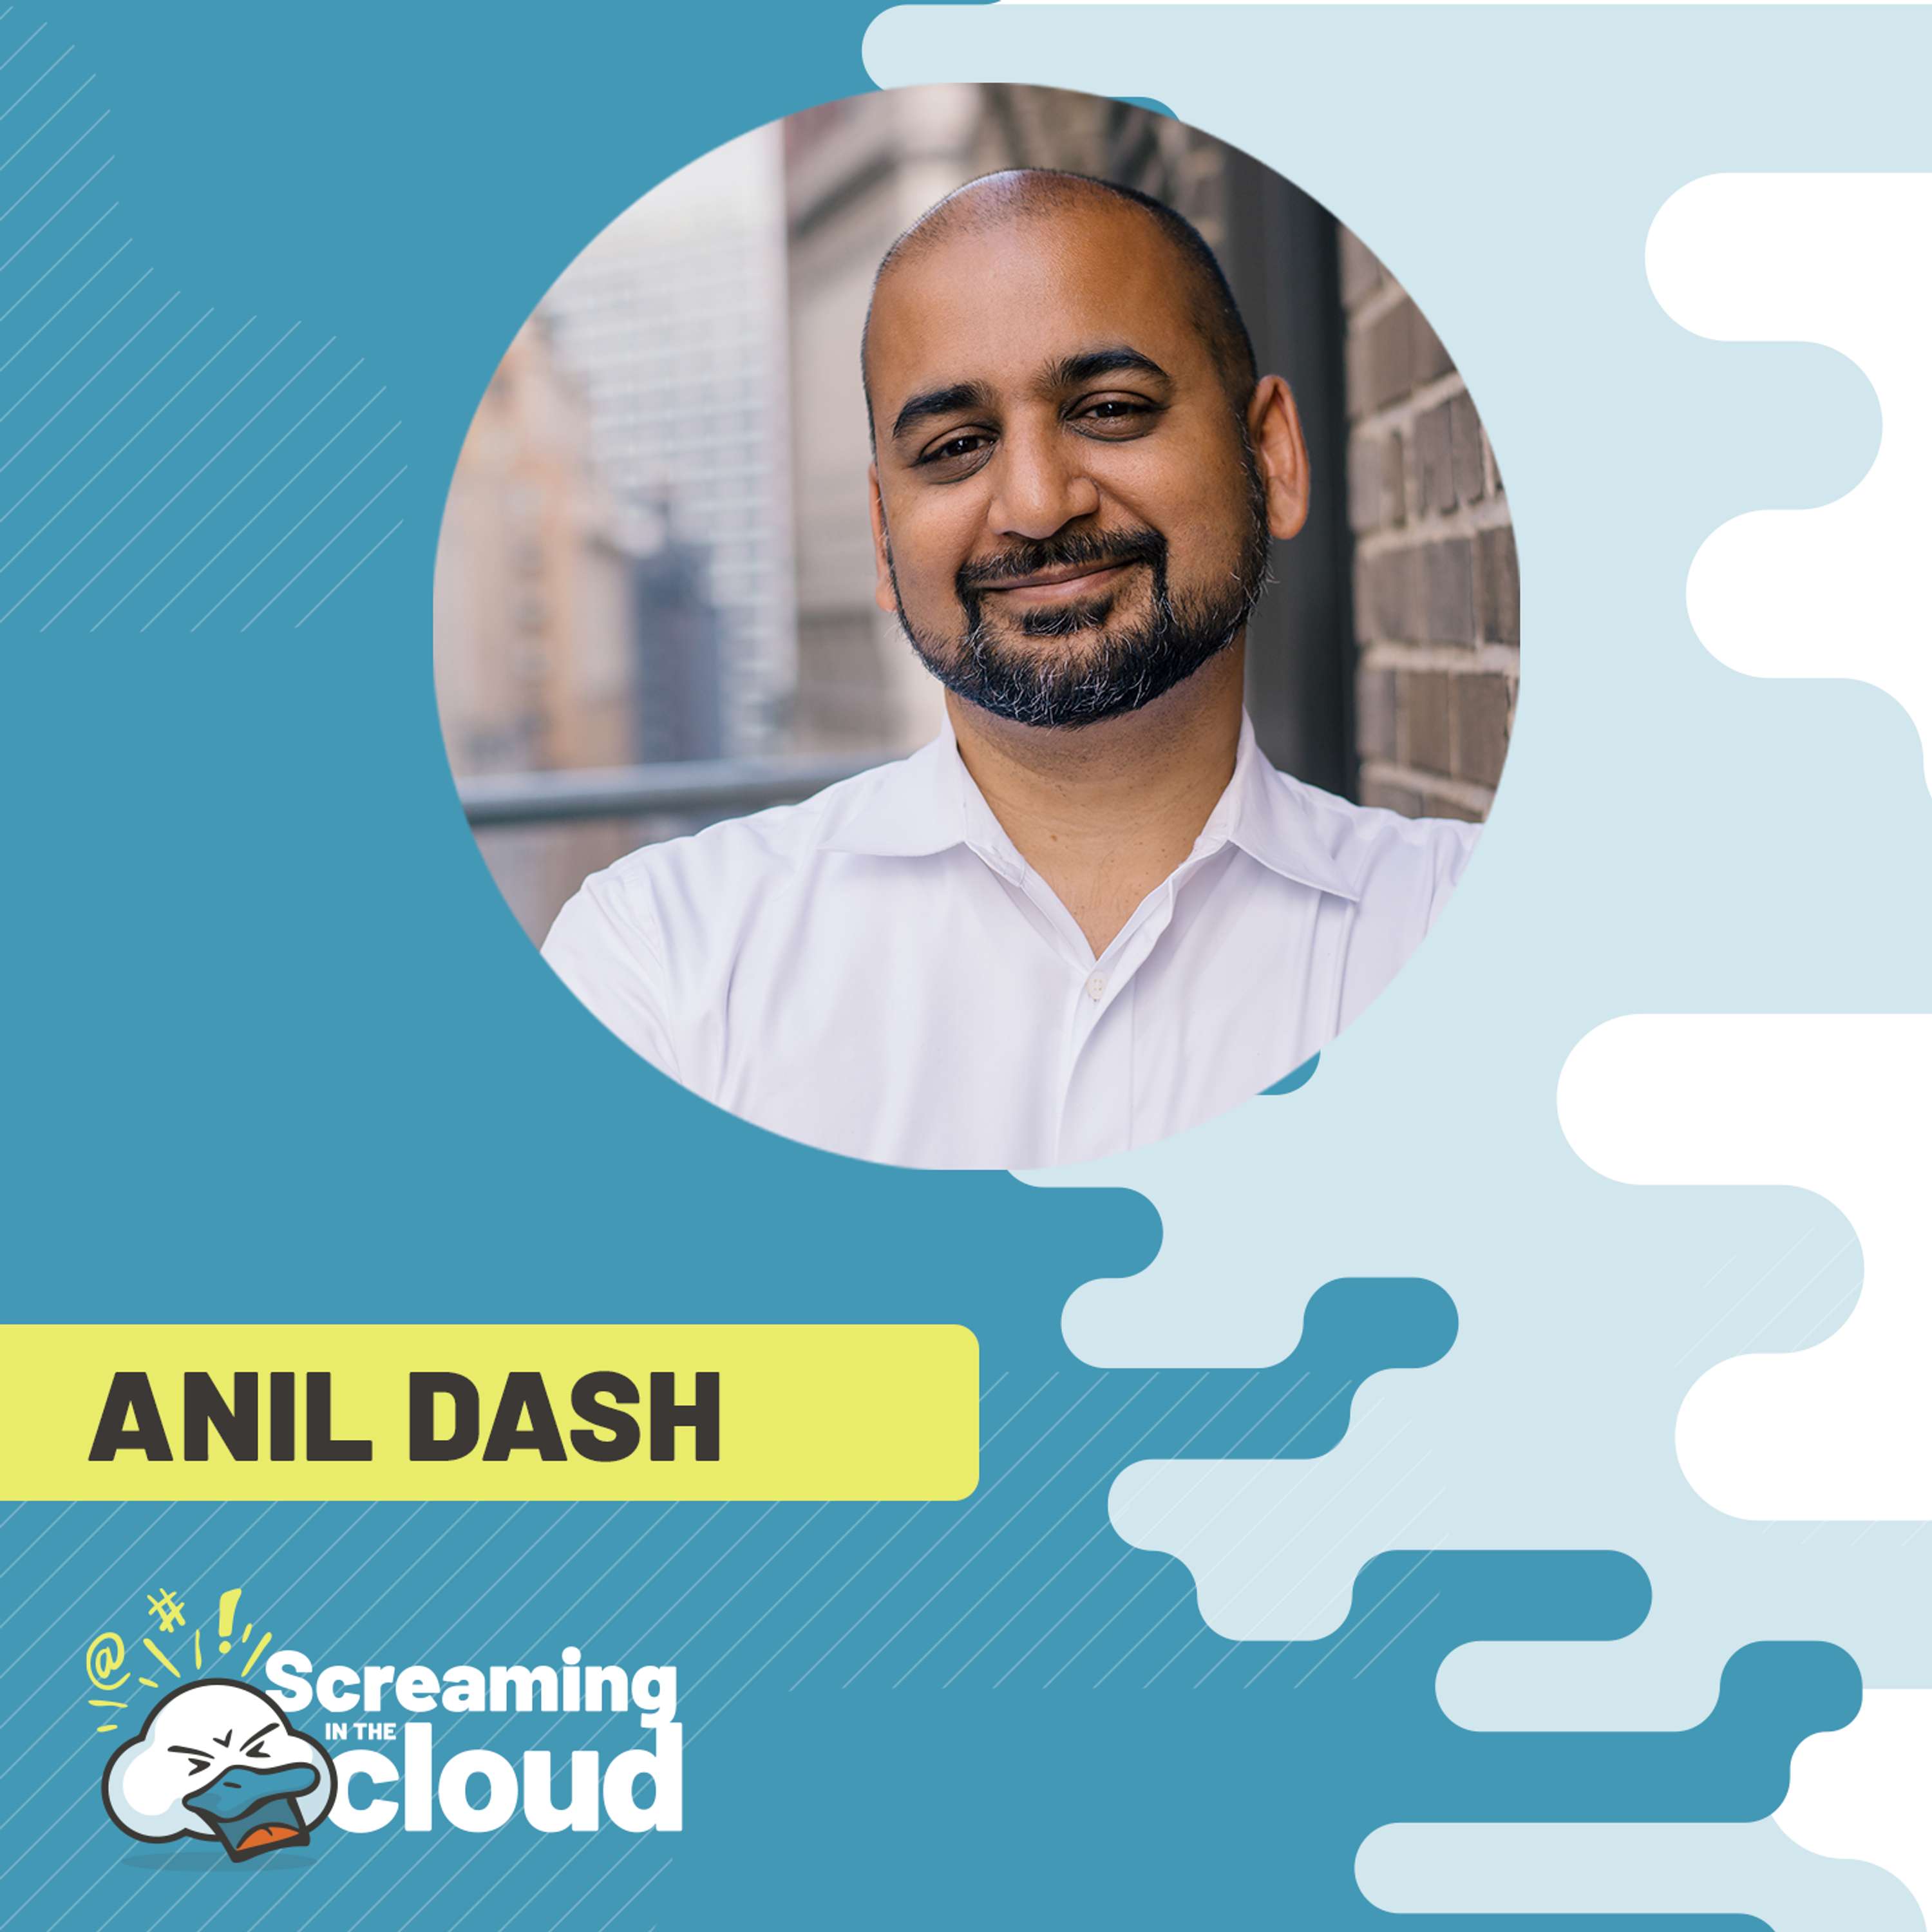 Merging Vision, Community, and Technology With Anil Dash